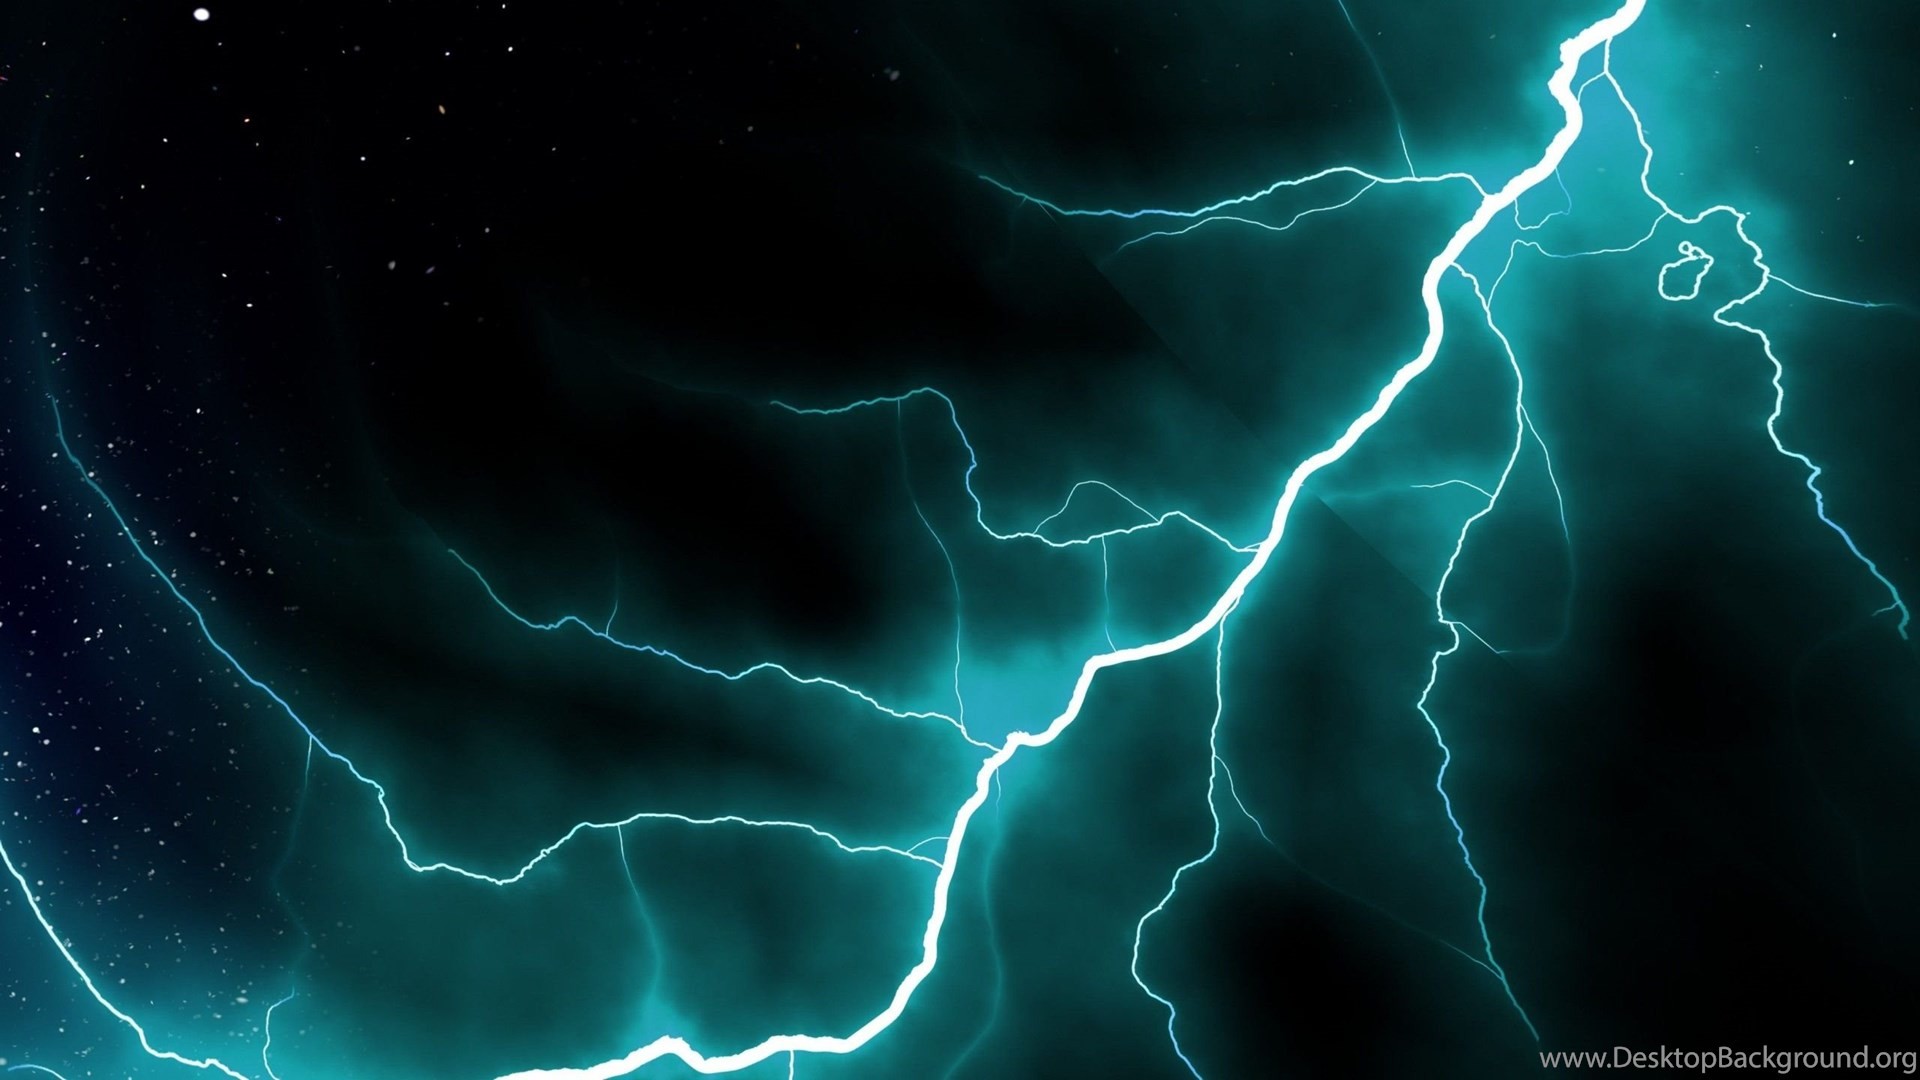 Black Lightning Background Images, HD Pictures and Wallpaper For Free  Download | Pngtree